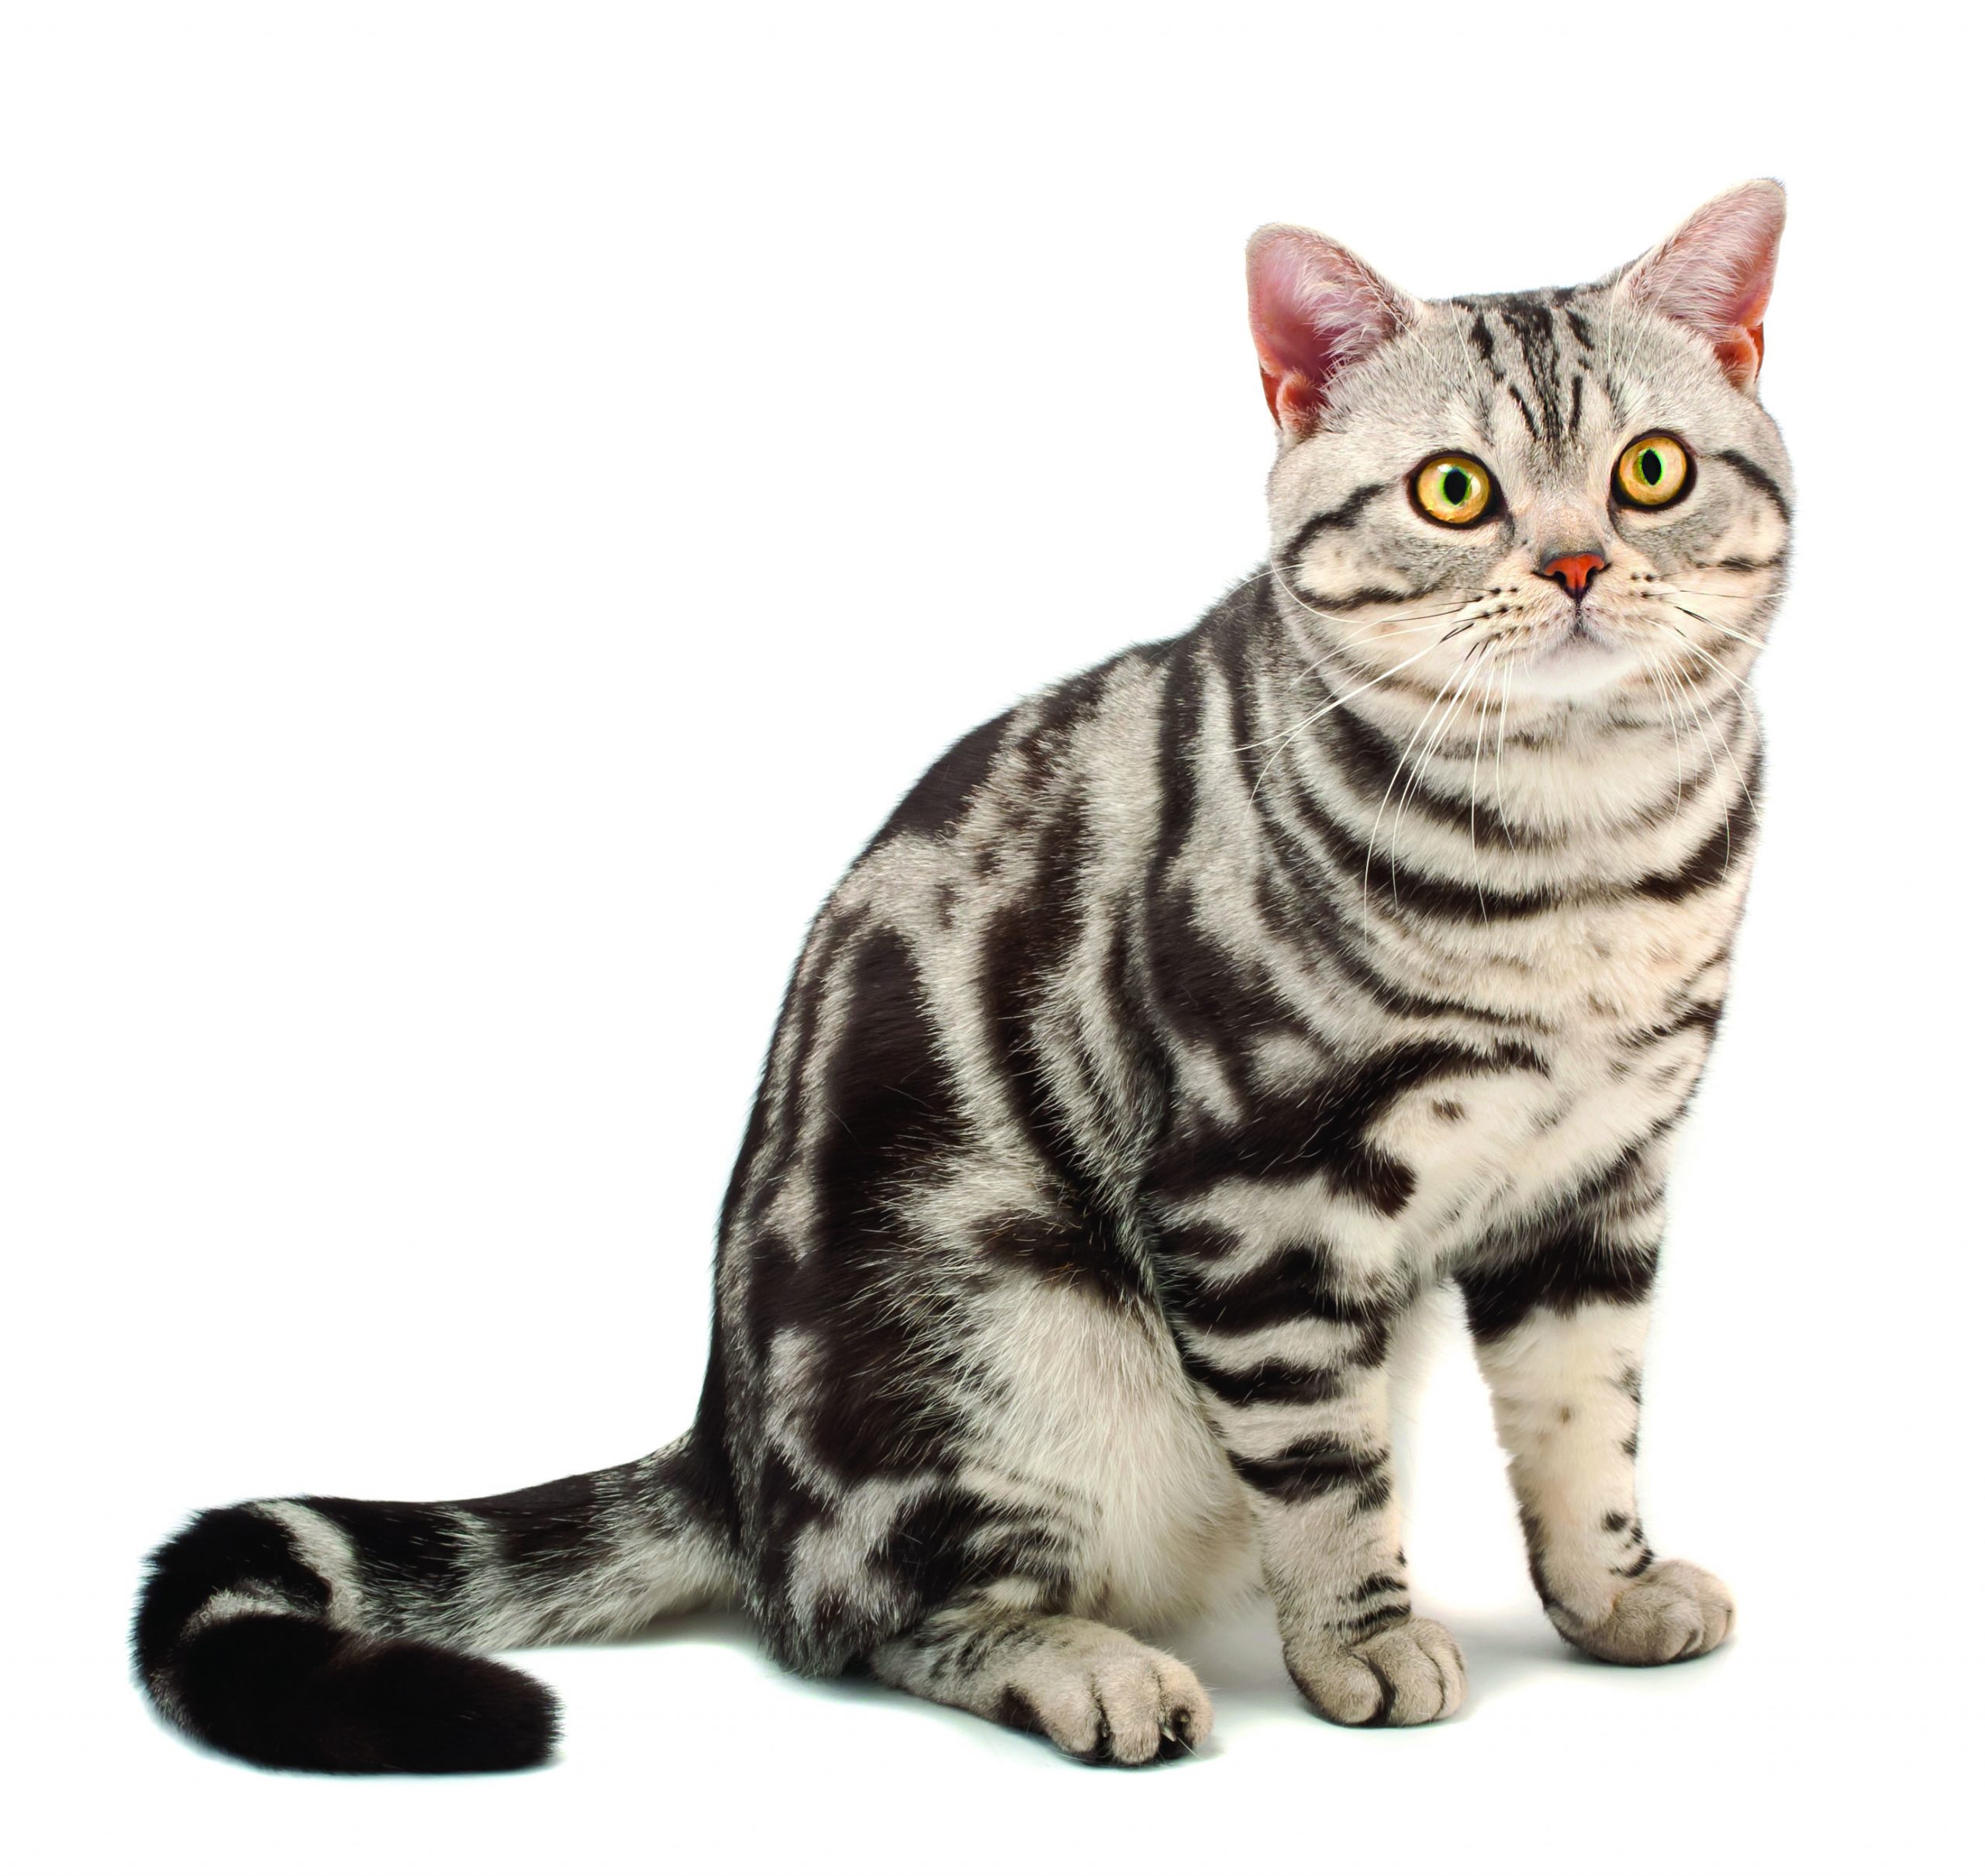 Feline Breeds, Domestic Shorthair Cats, and Color Patterns